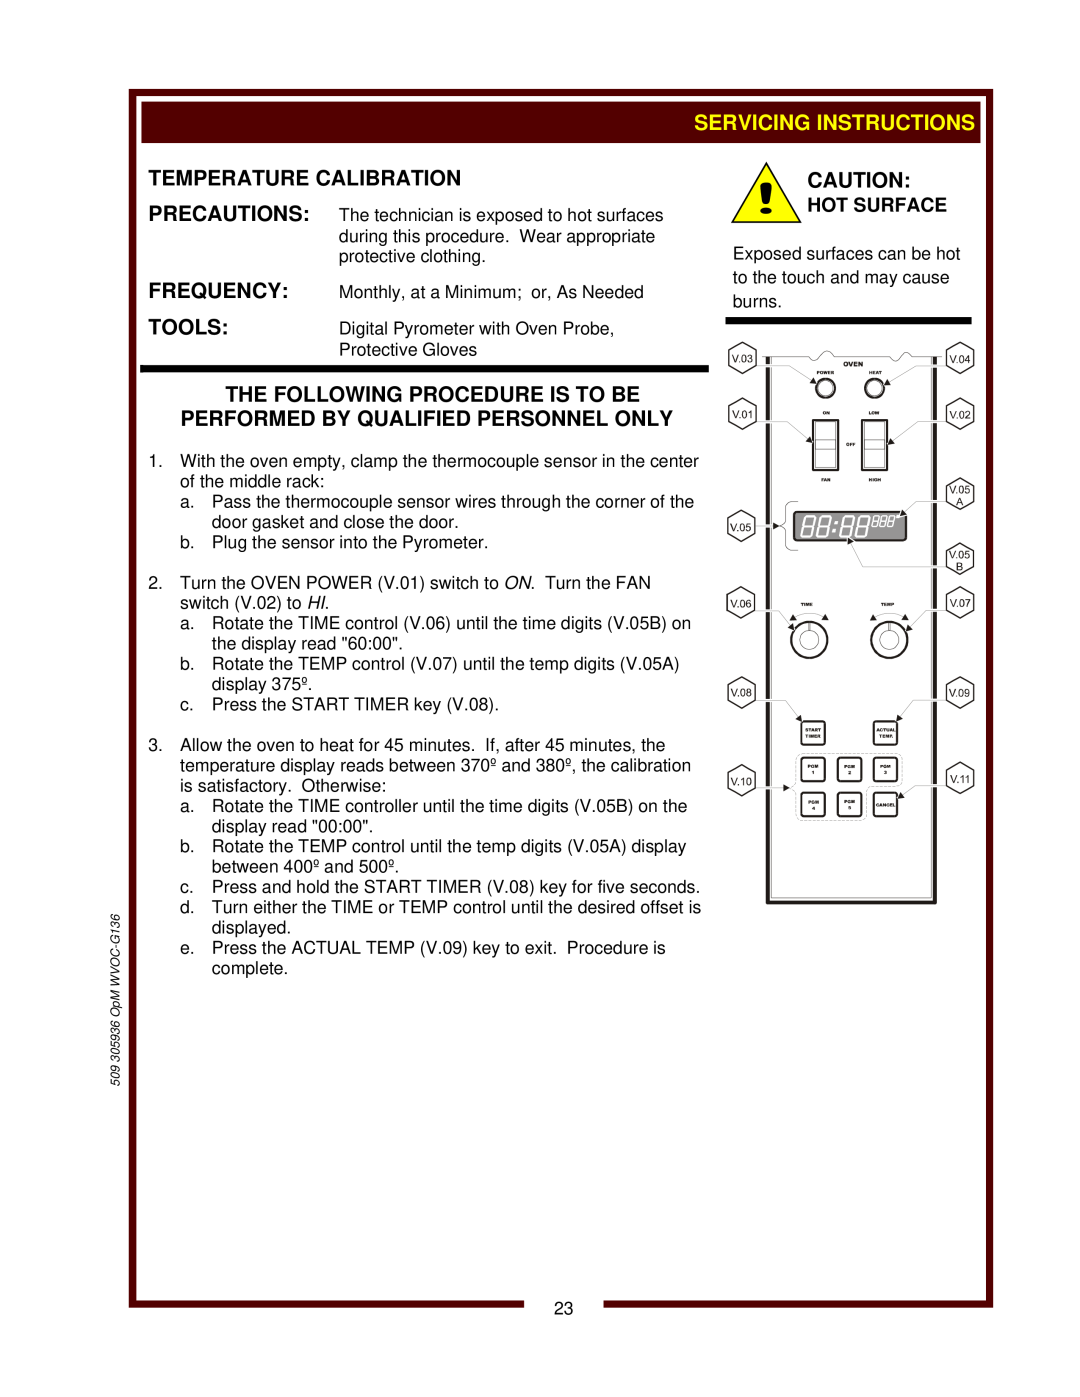 Bloomfield WVOC-G136 operation manual Servicing Instructions, Temperature Calibration, Hot Surface 